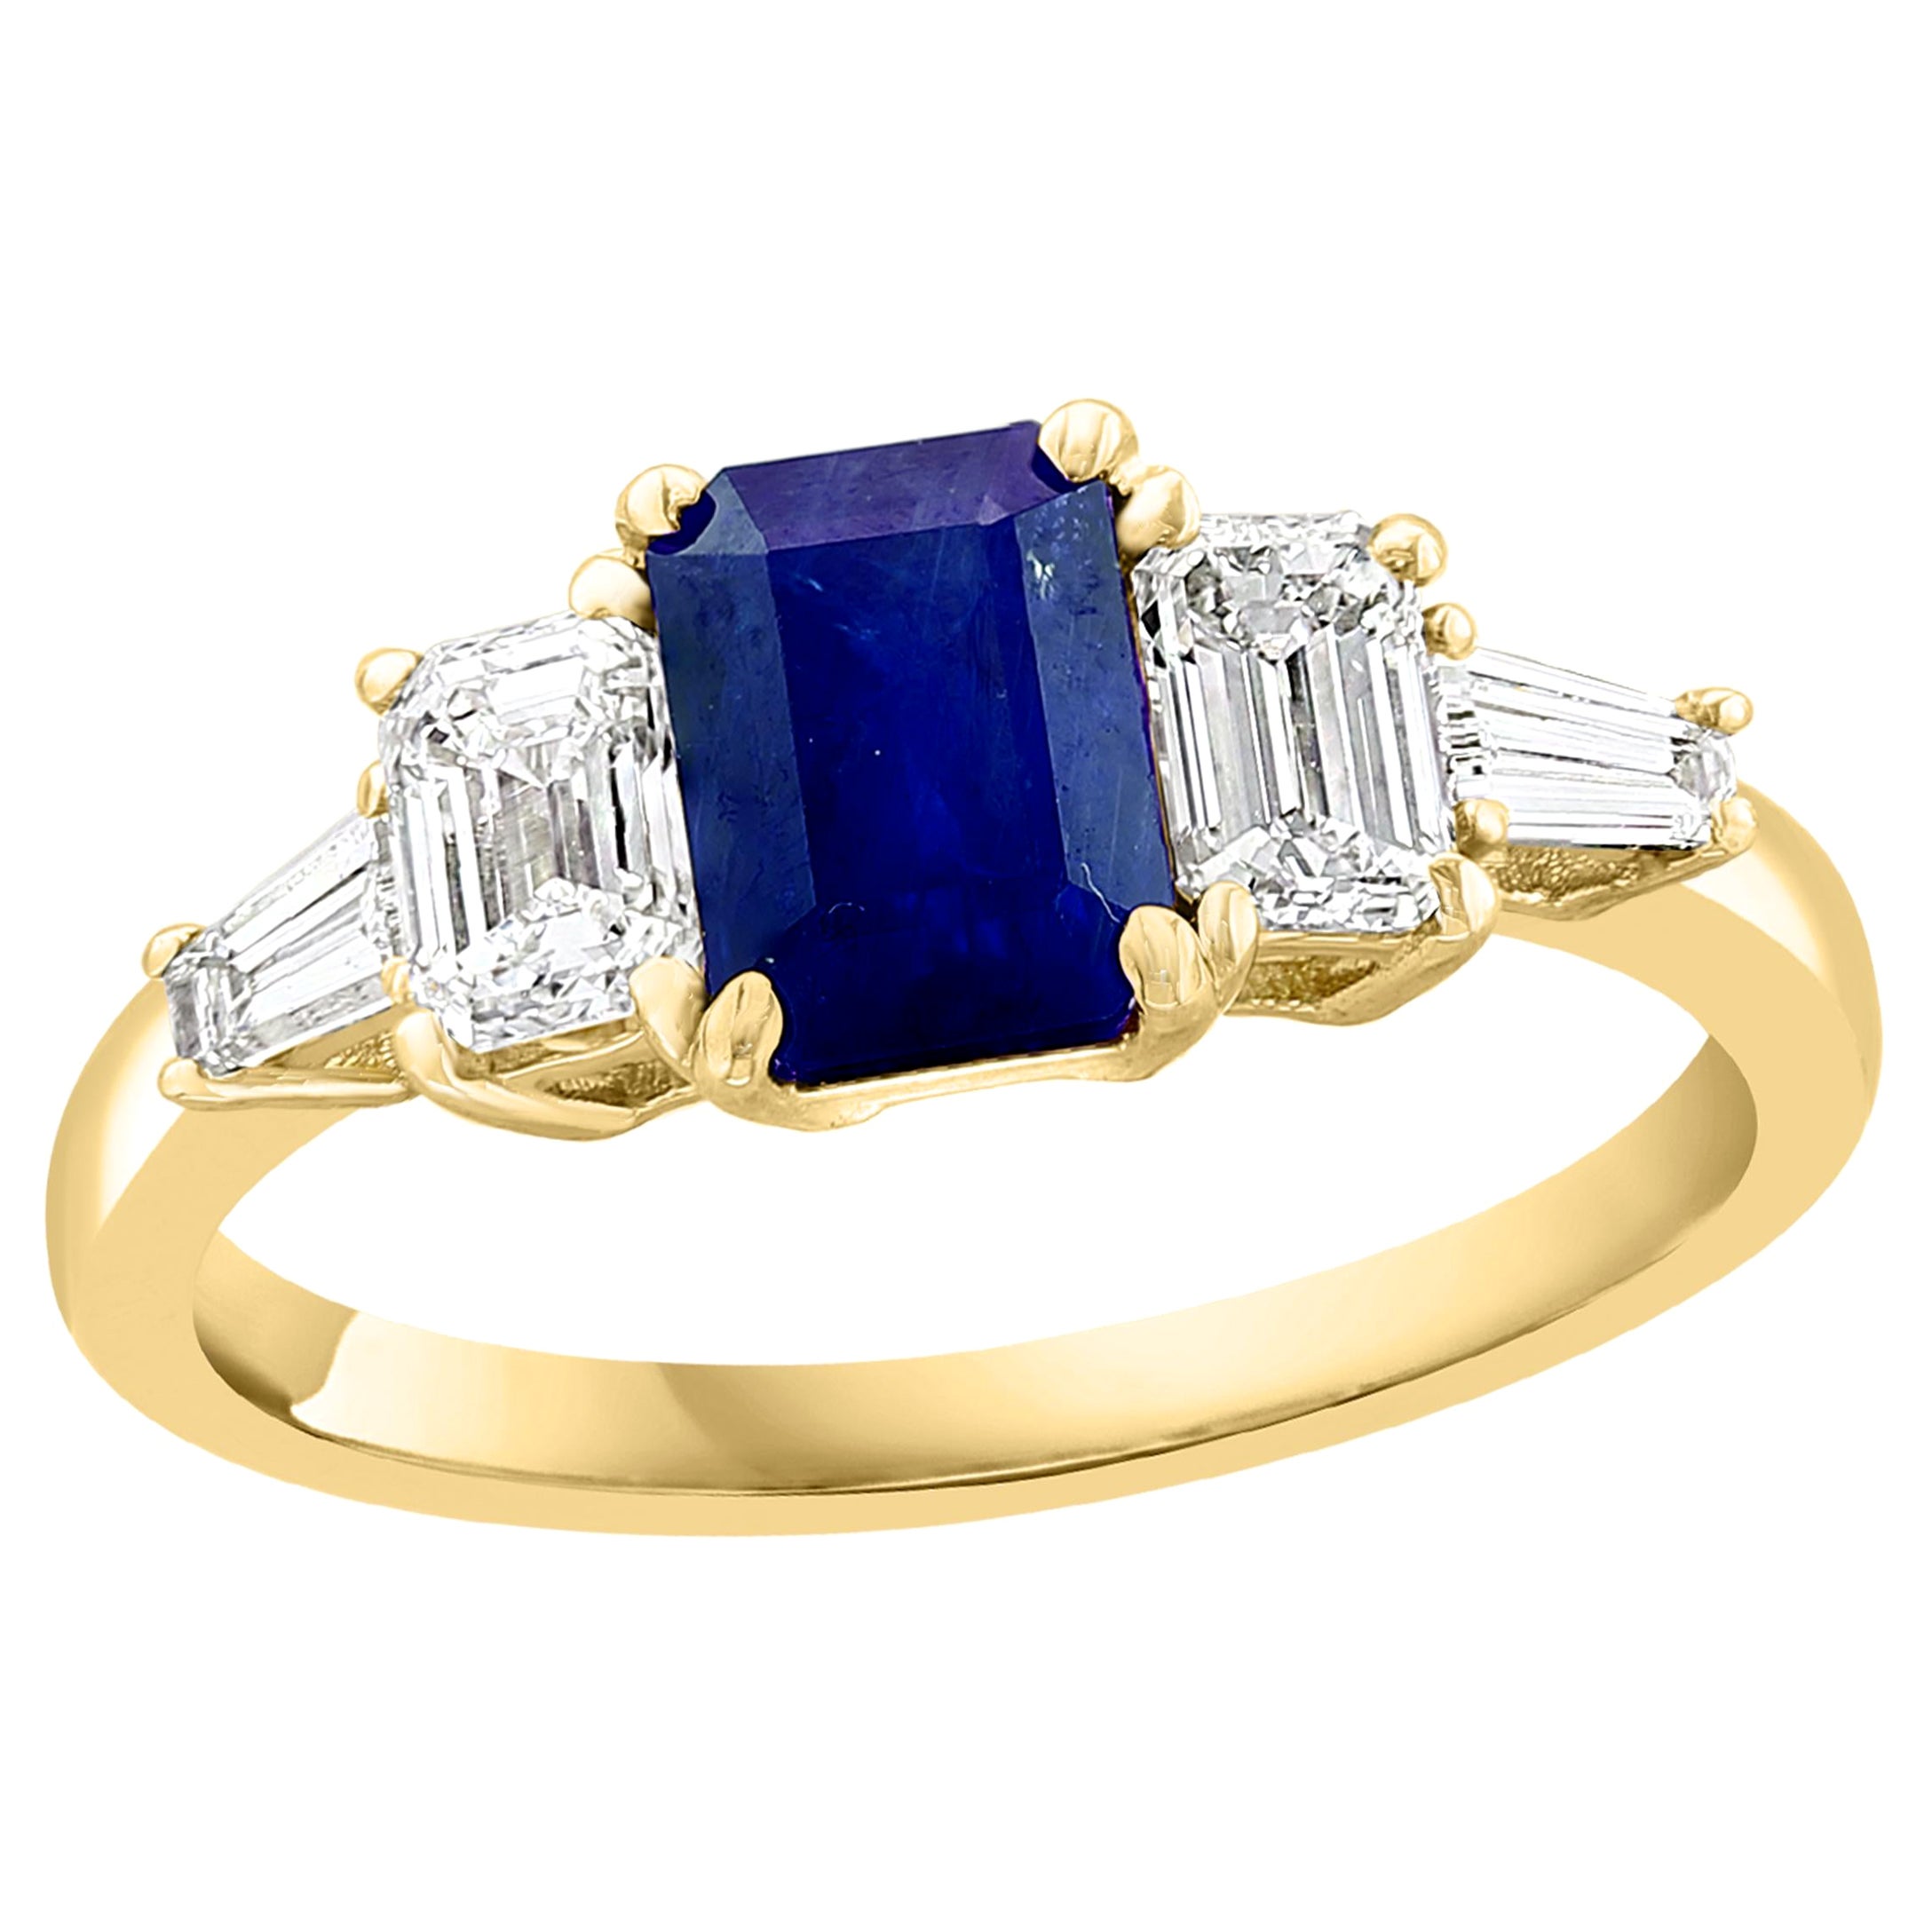 1.12 Carat Emerald Cut Blue Sapphire and Diamond 5 Stone Ring in 14K Yellow Gold For Sale